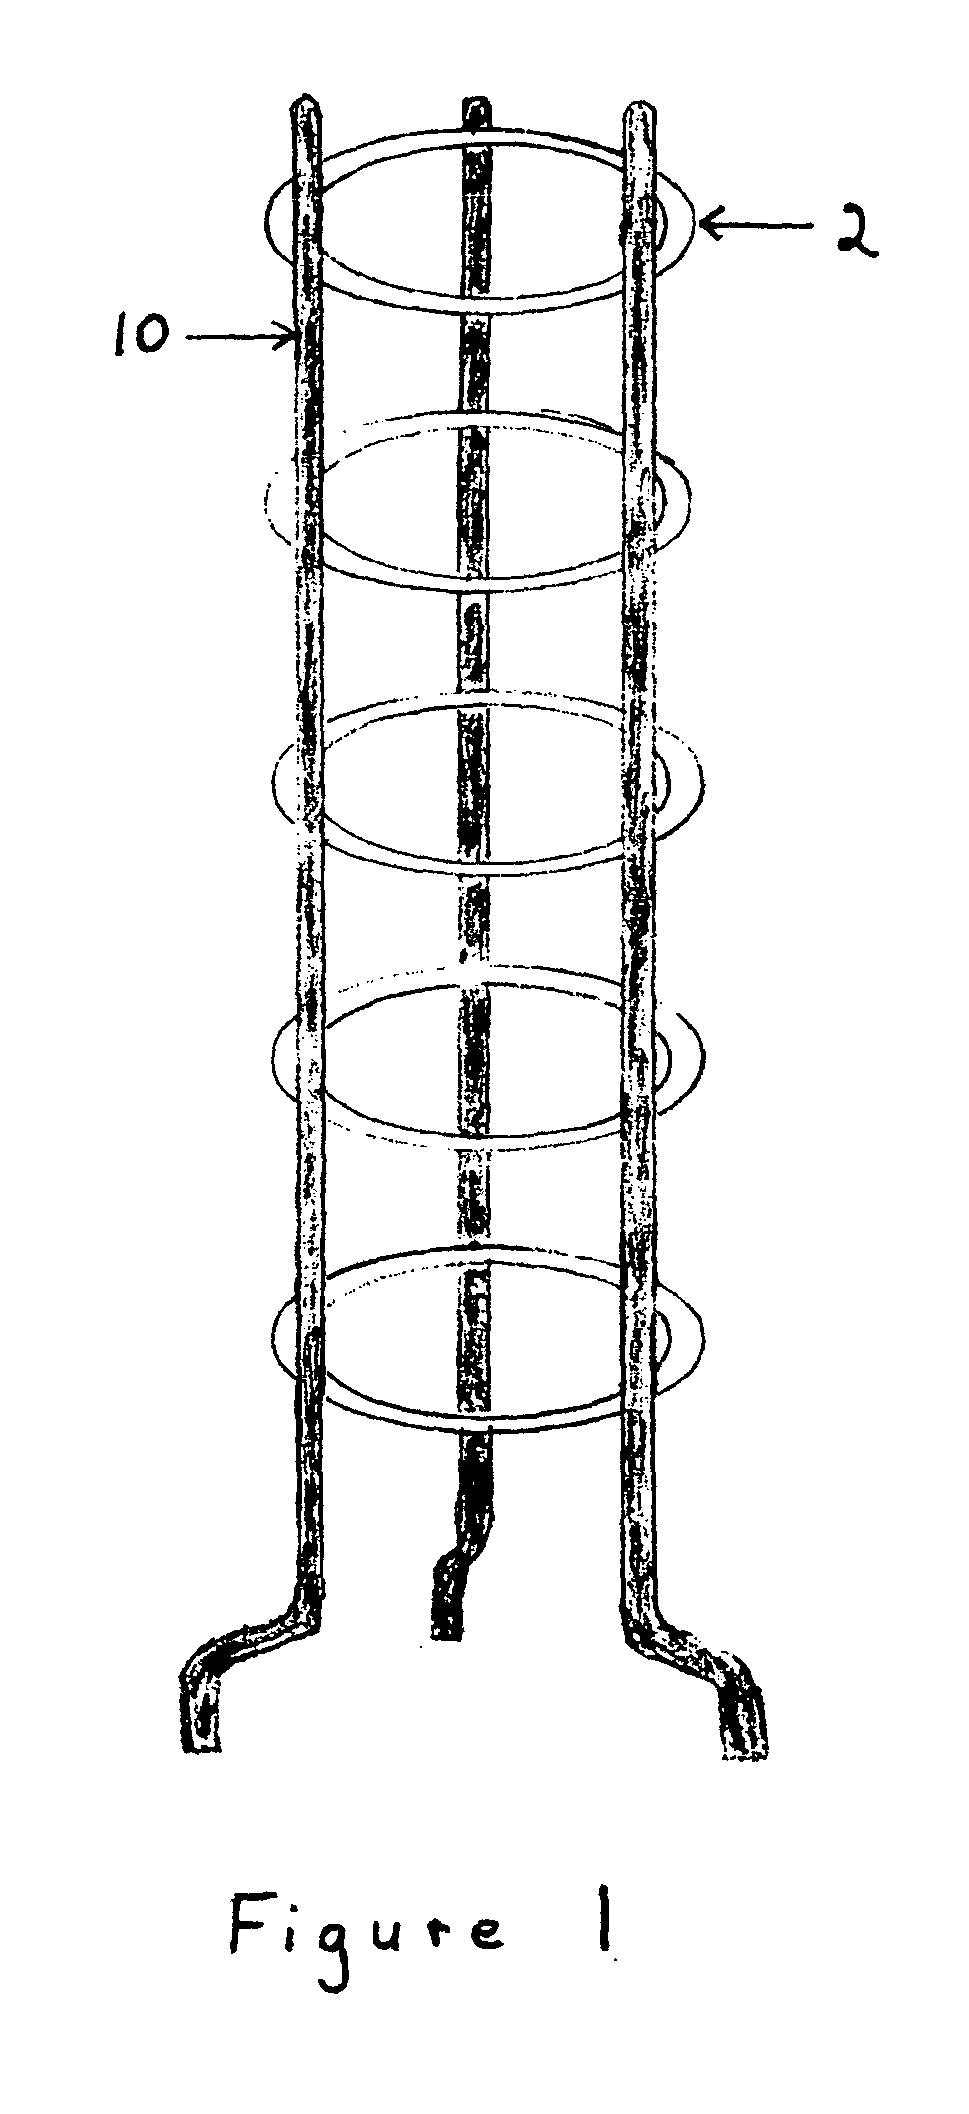 Plant support device